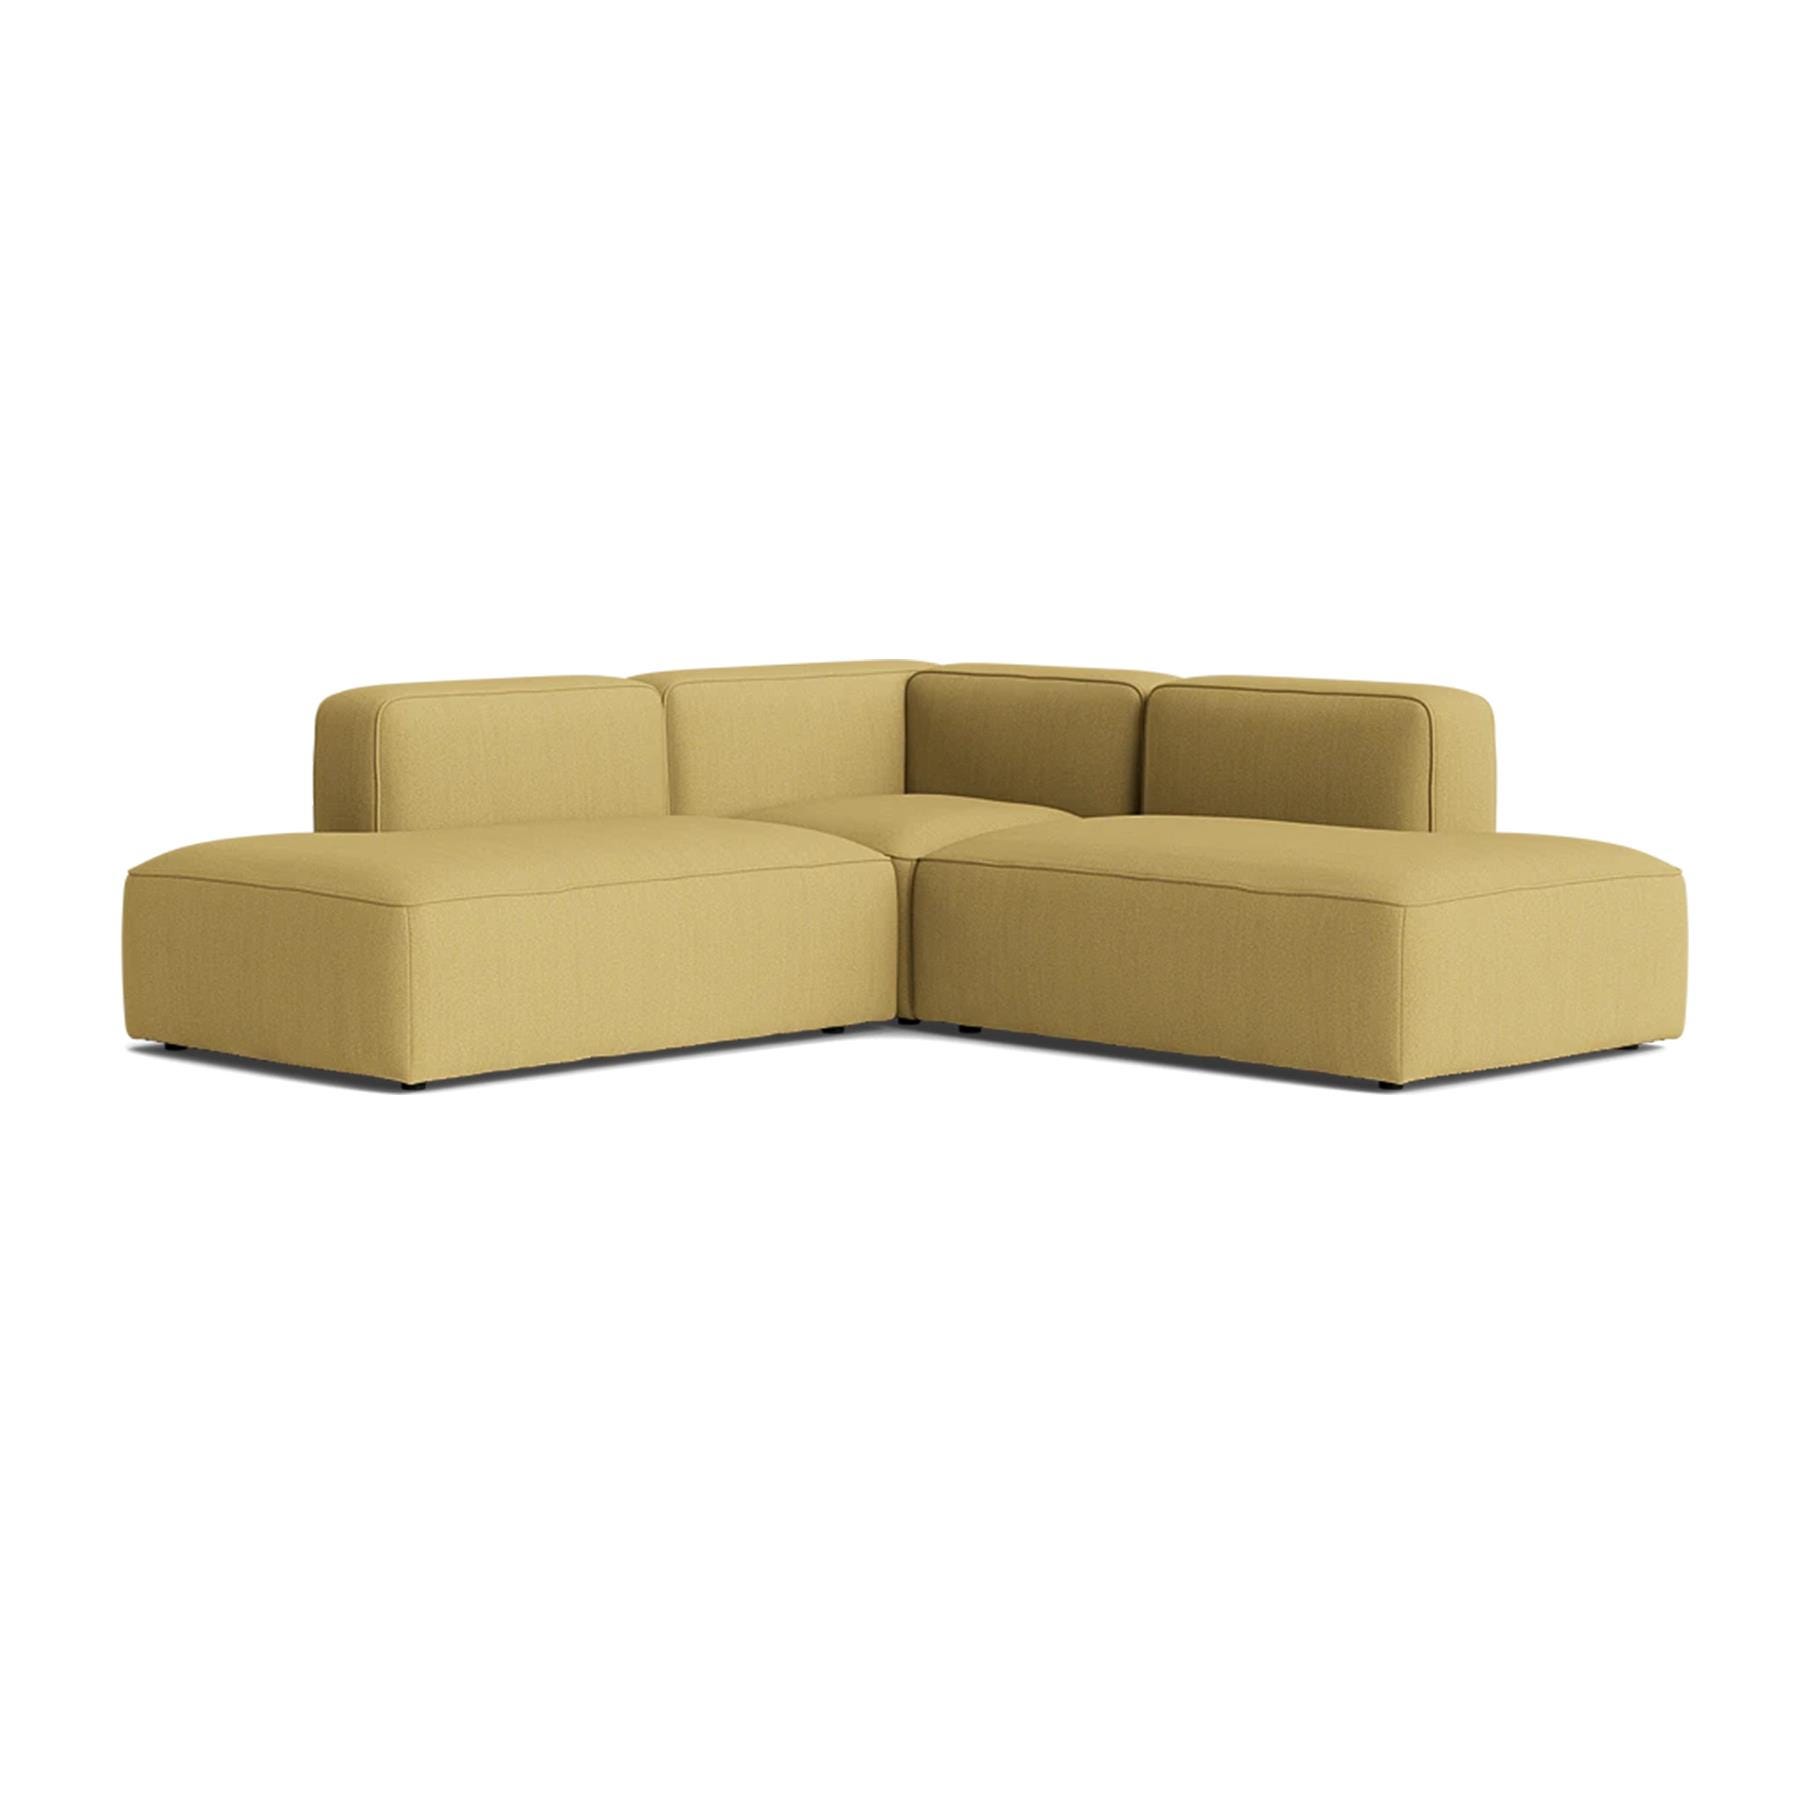 Make Nordic Basecamp Corner Sofa With Open Ends Hallingdal 407 Yellow Designer Furniture From Holloways Of Ludlow